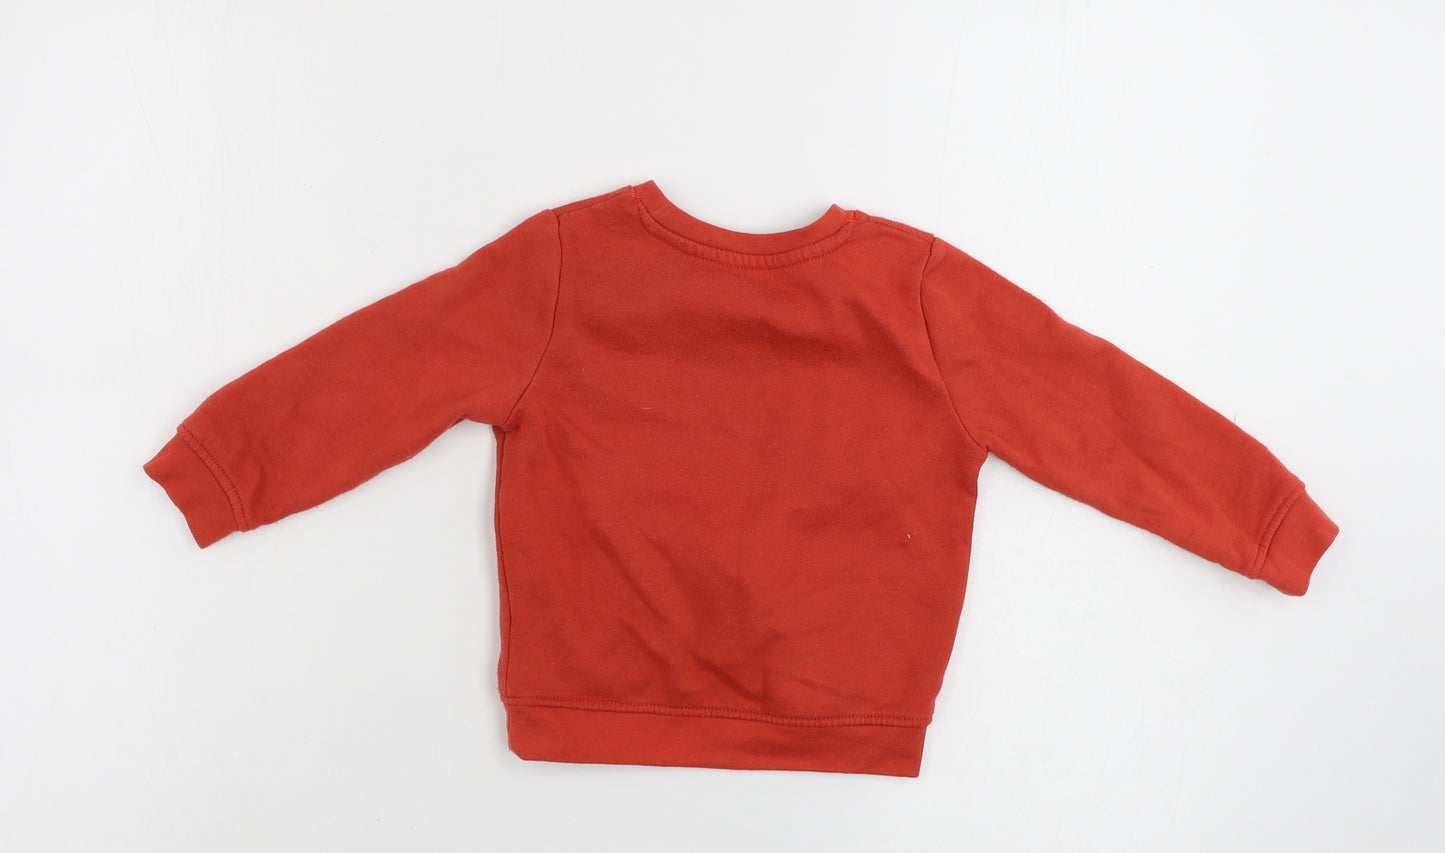 Primark  Boys Red   Pullover Jumper Size 2-3 Years